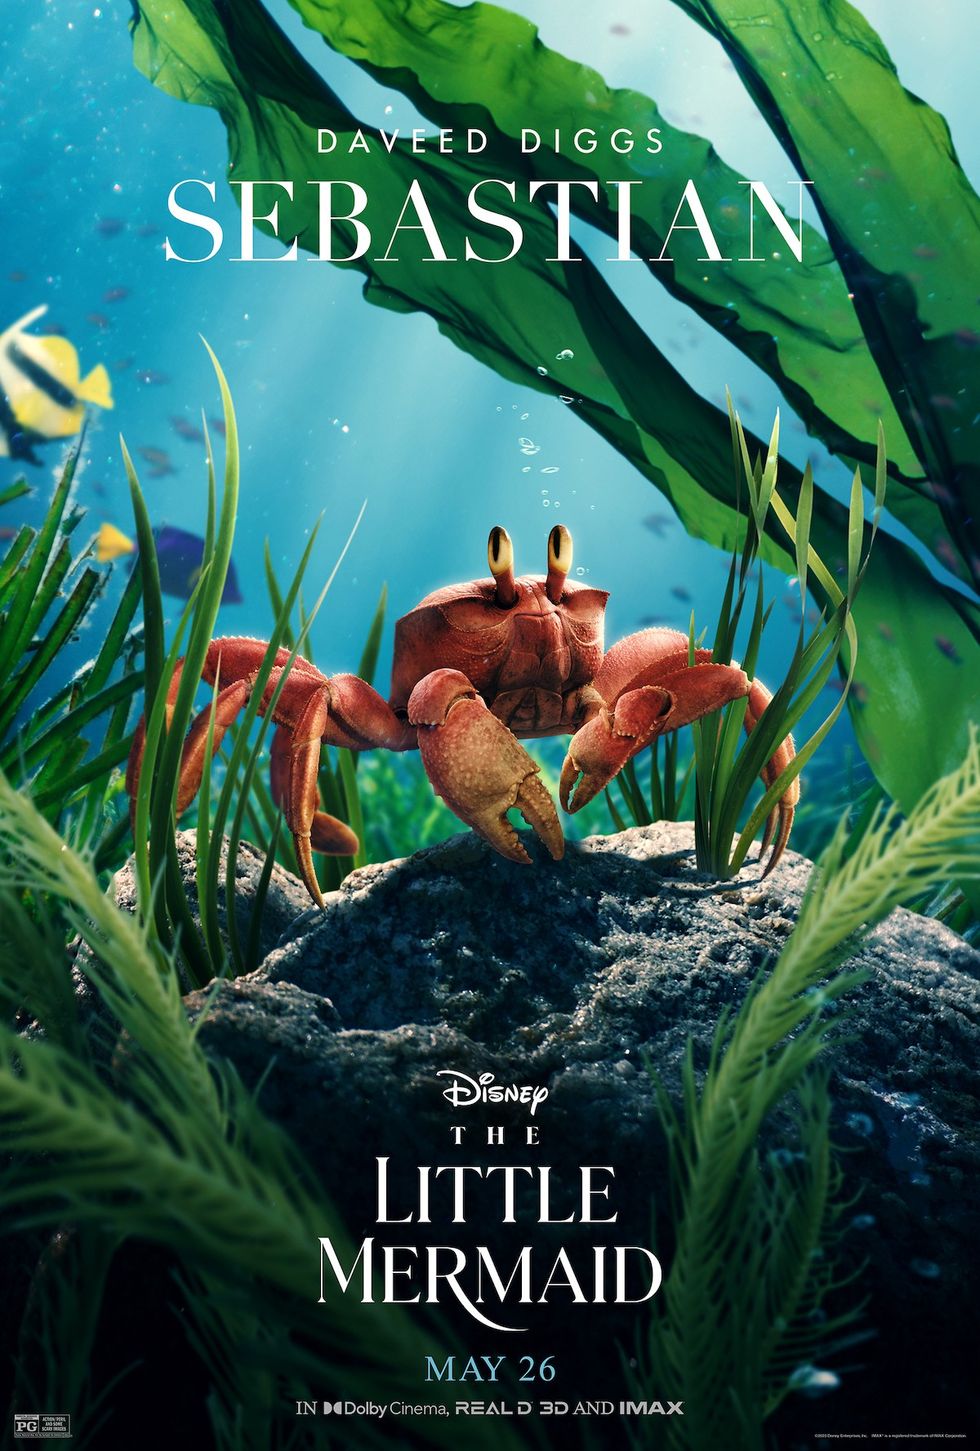 The New "The Little Mermaid" TV Spot Gives Us A Look At The Film's